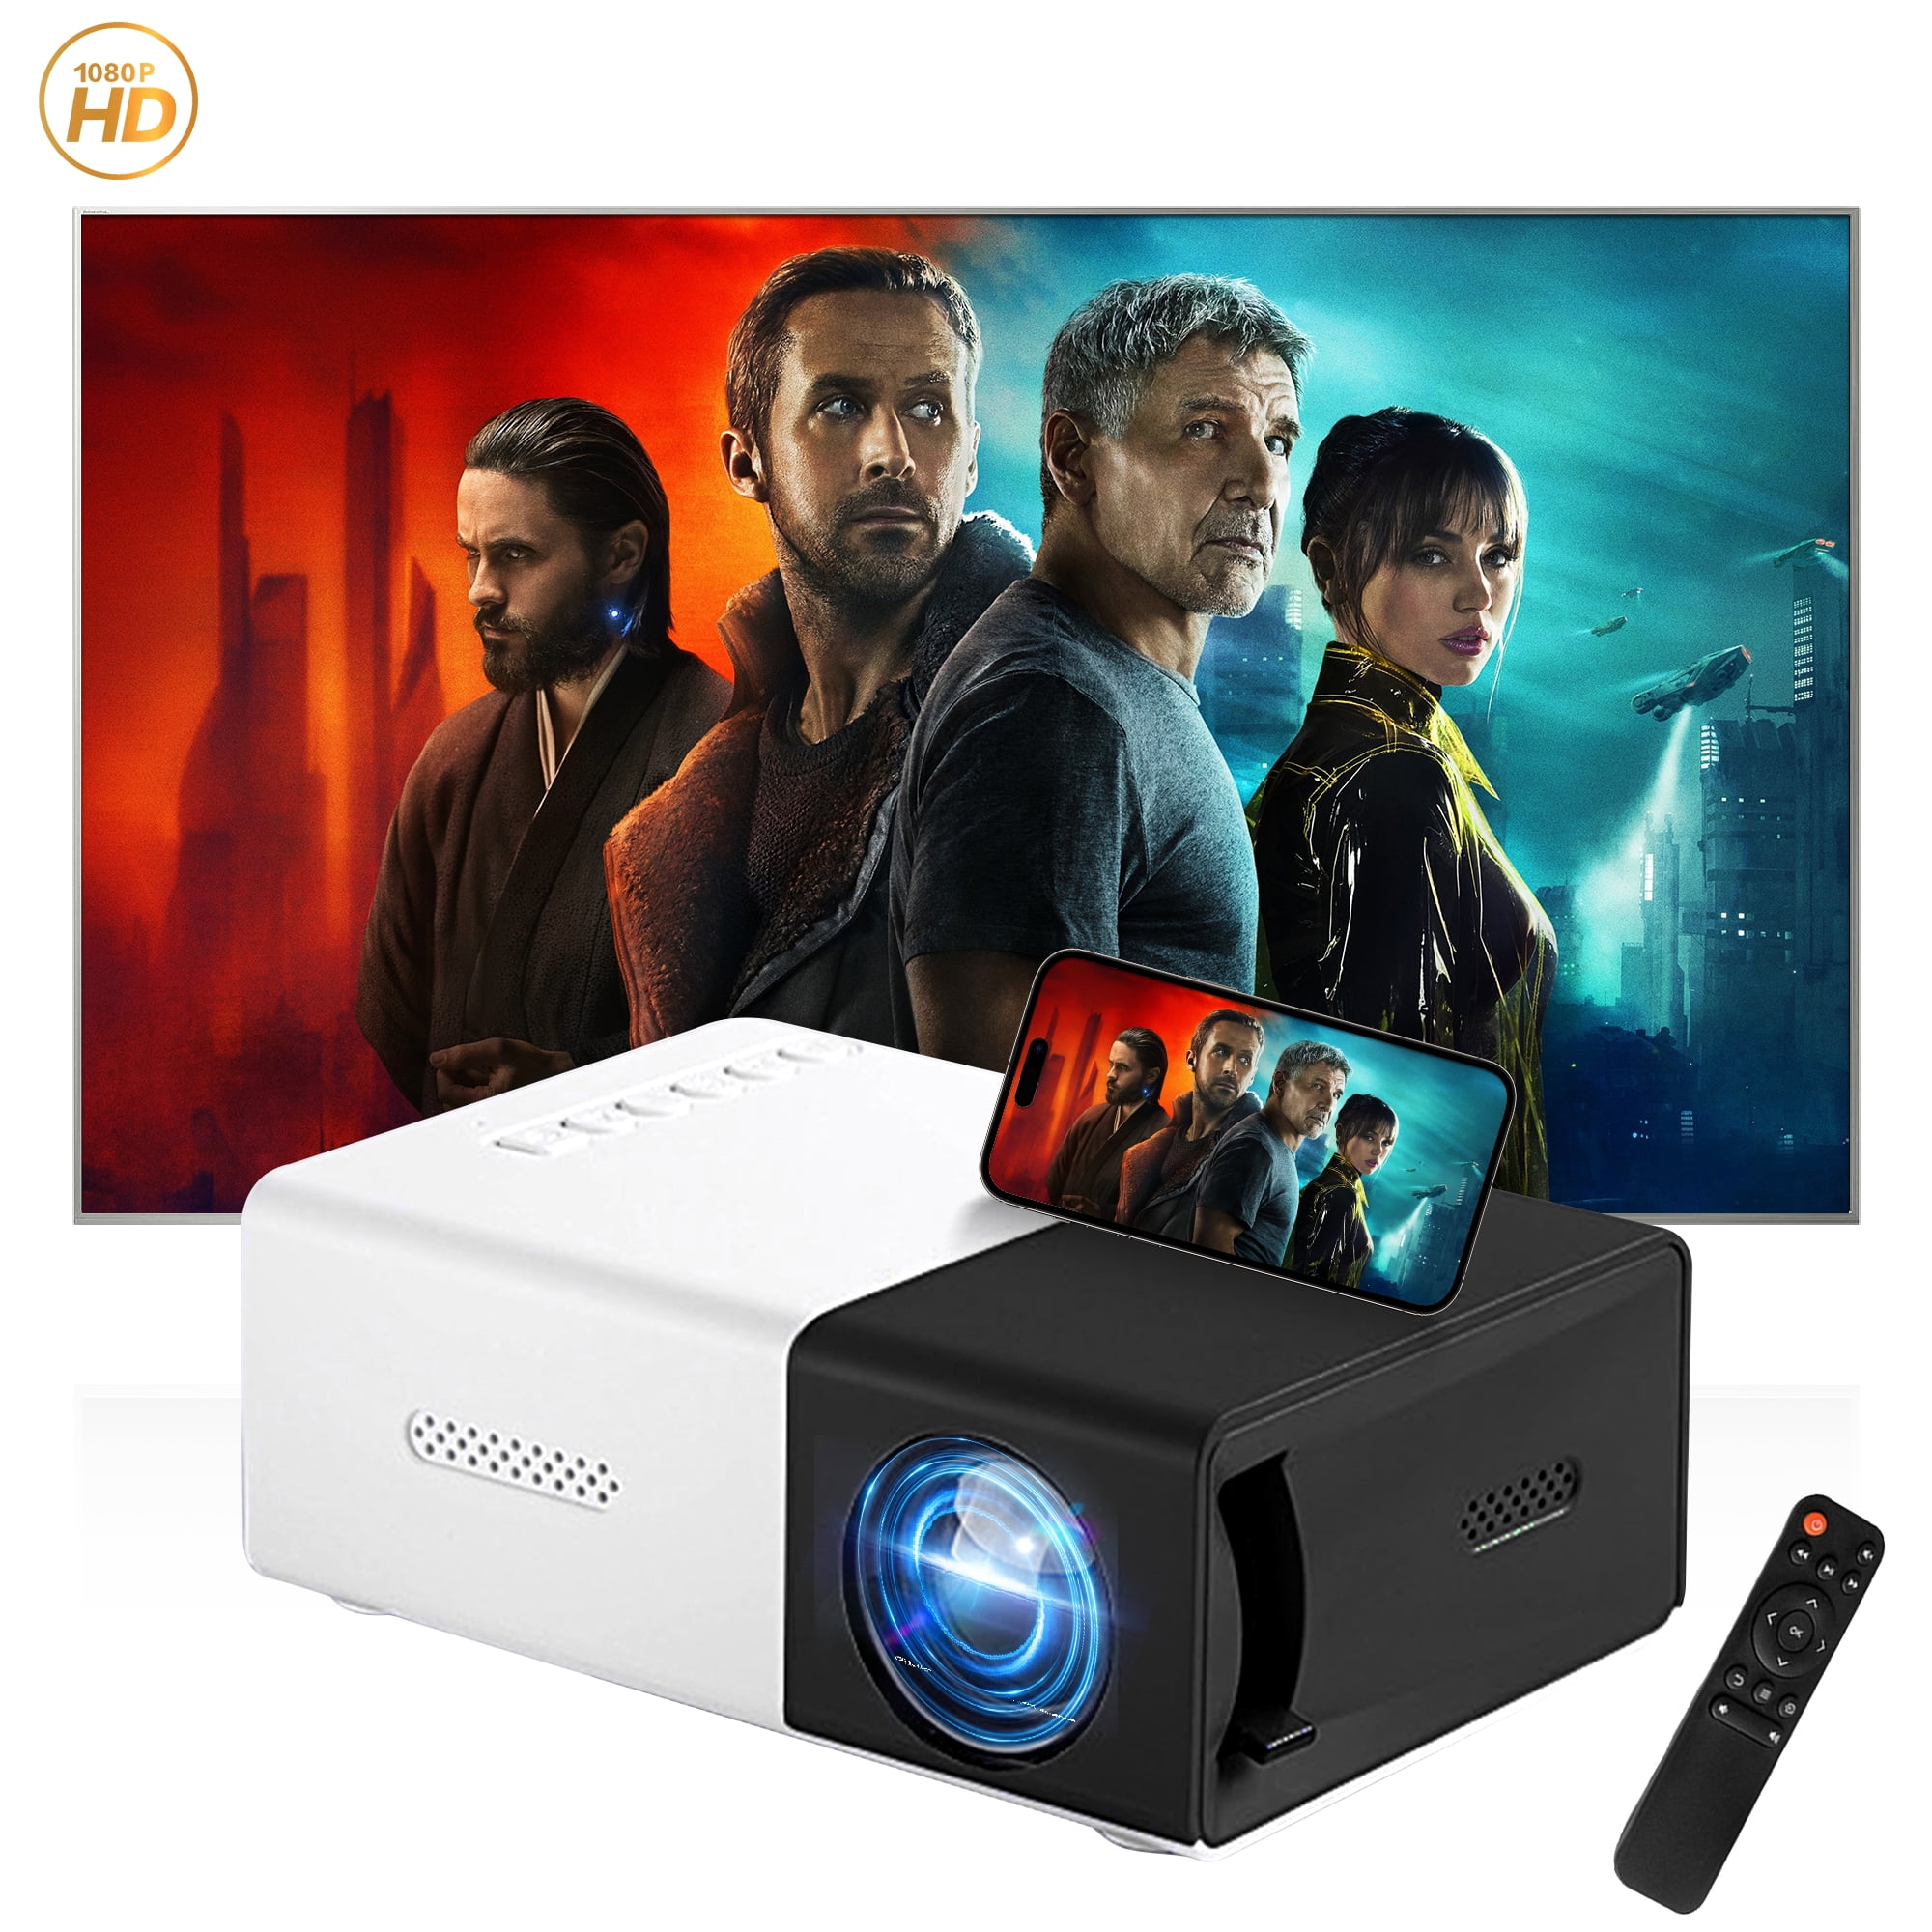 1 Set YG300 Mini LED Projector Built-in Speaker Manual Focusing  HDMI-compatible/USB/AV 1080P High Clarity Home Phone Projector Home Supplies